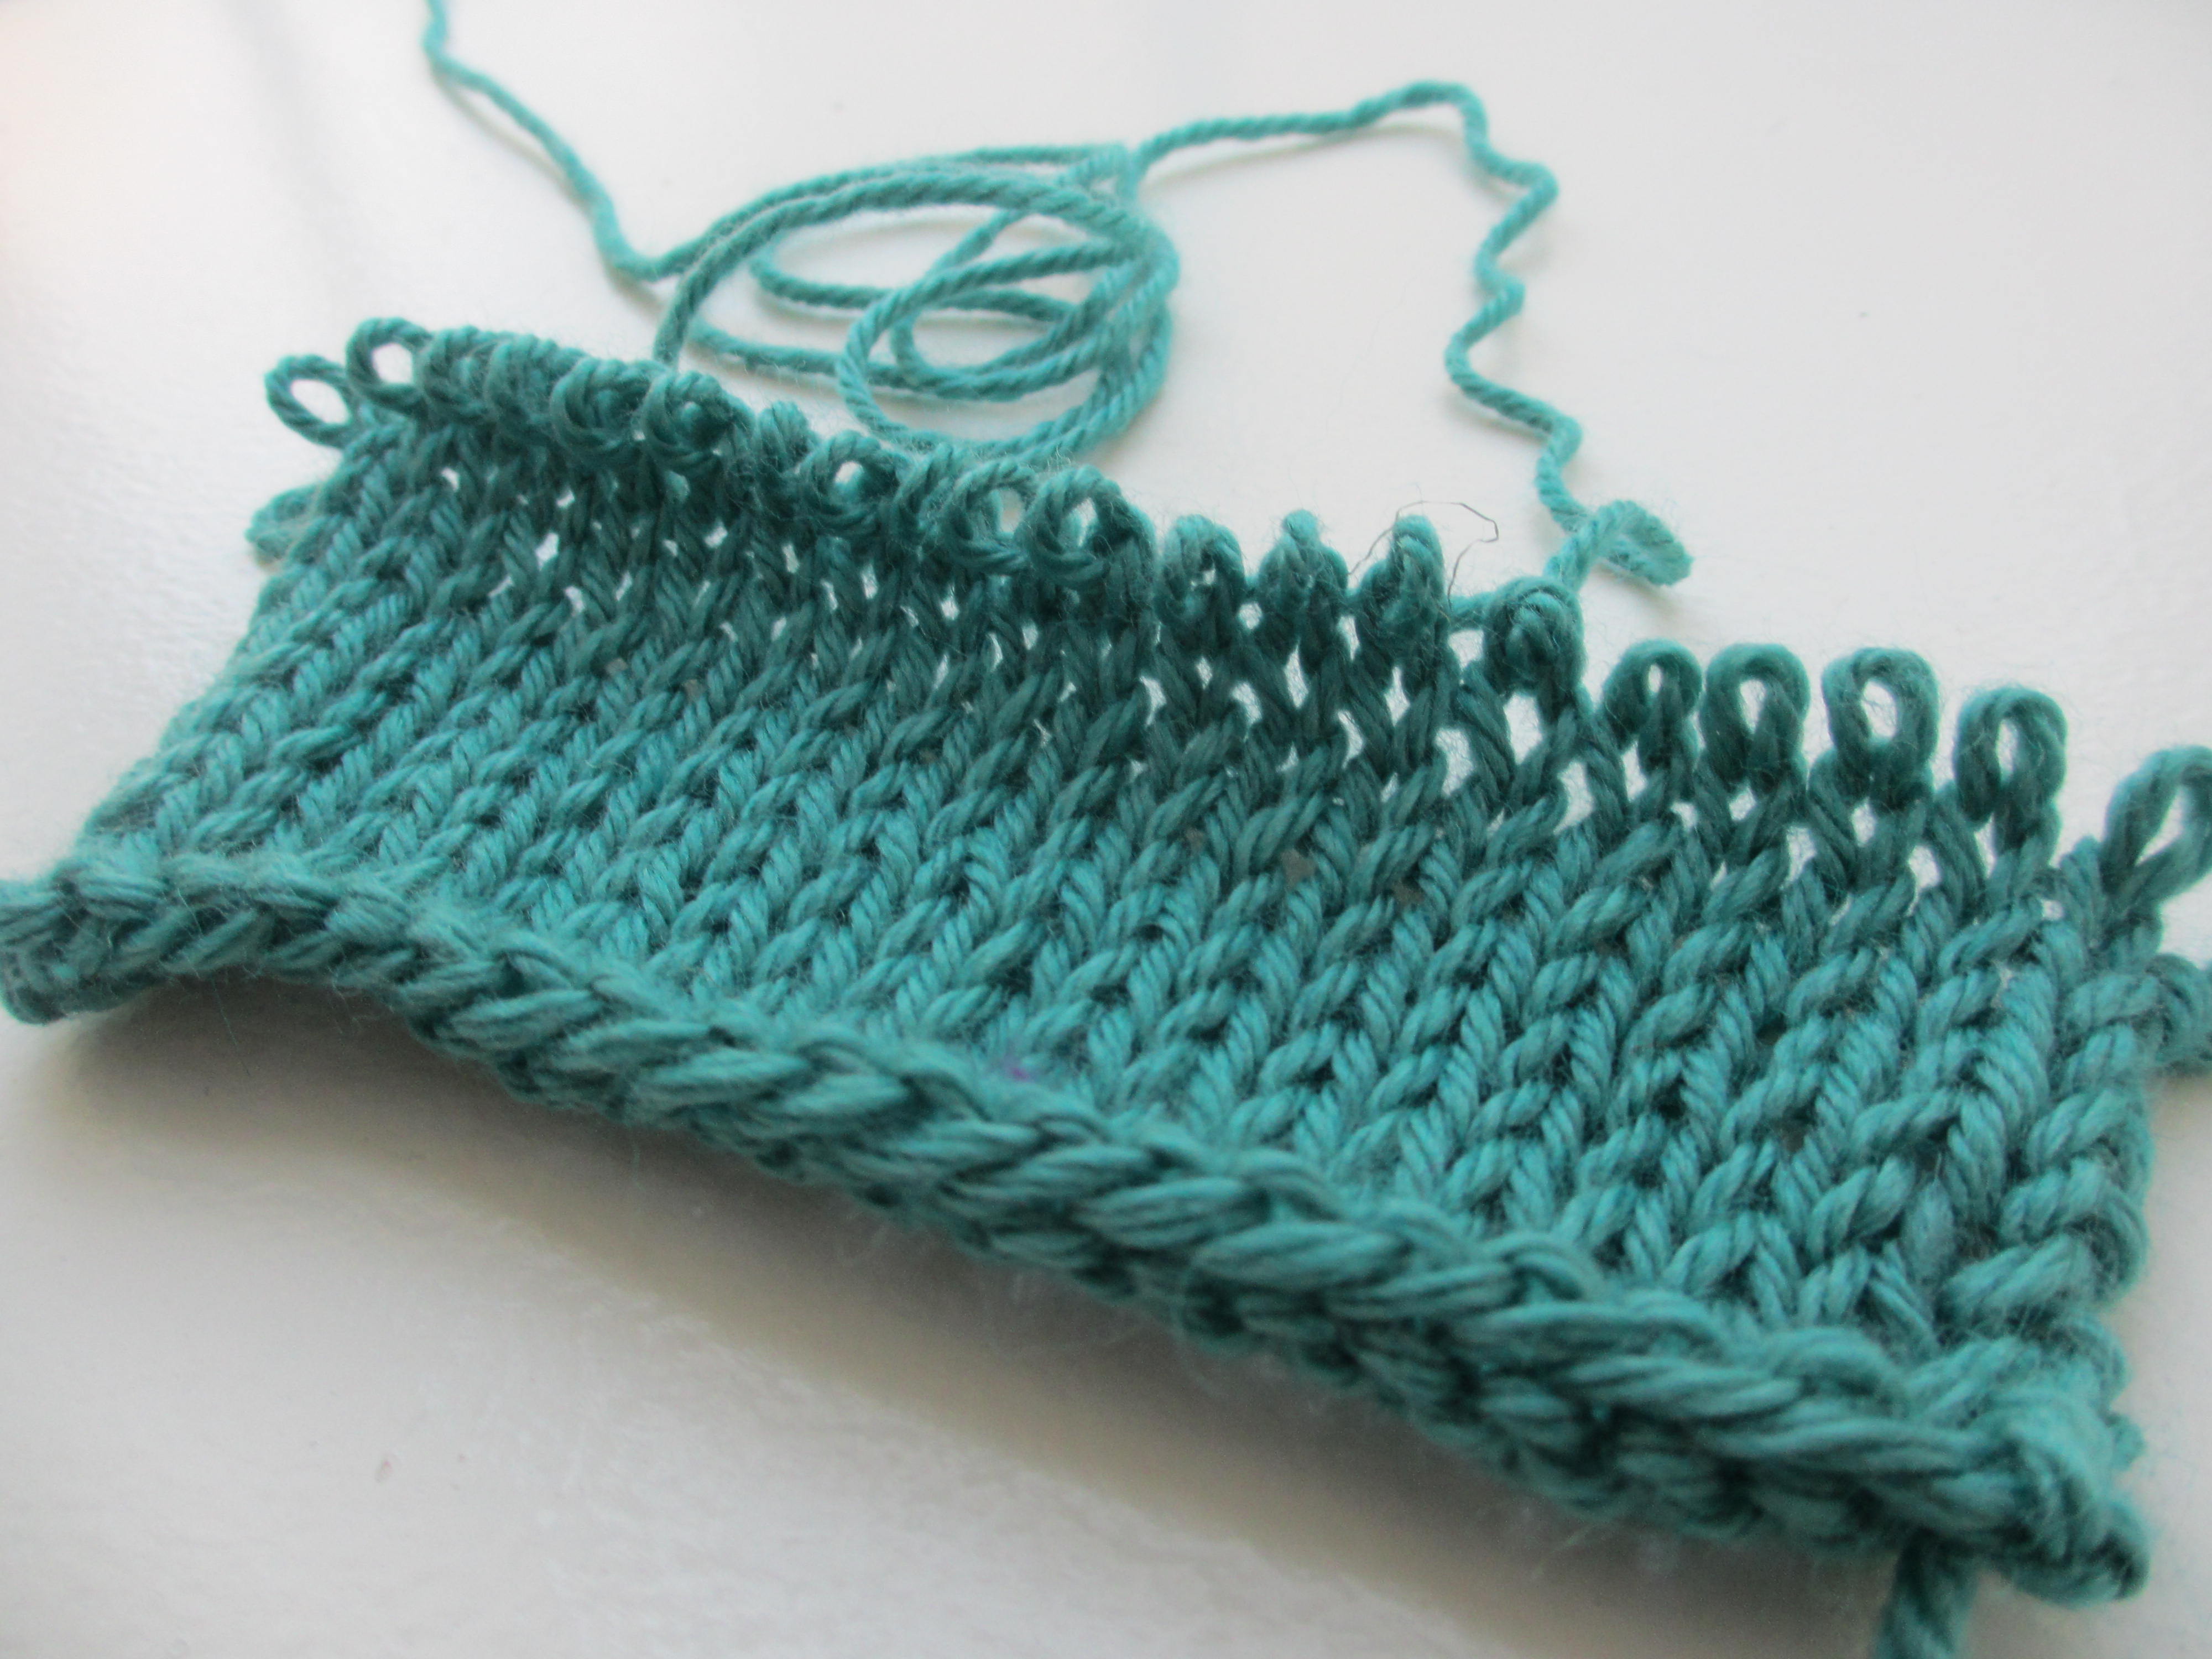 Ripping out your knitting - Swatch of Knit